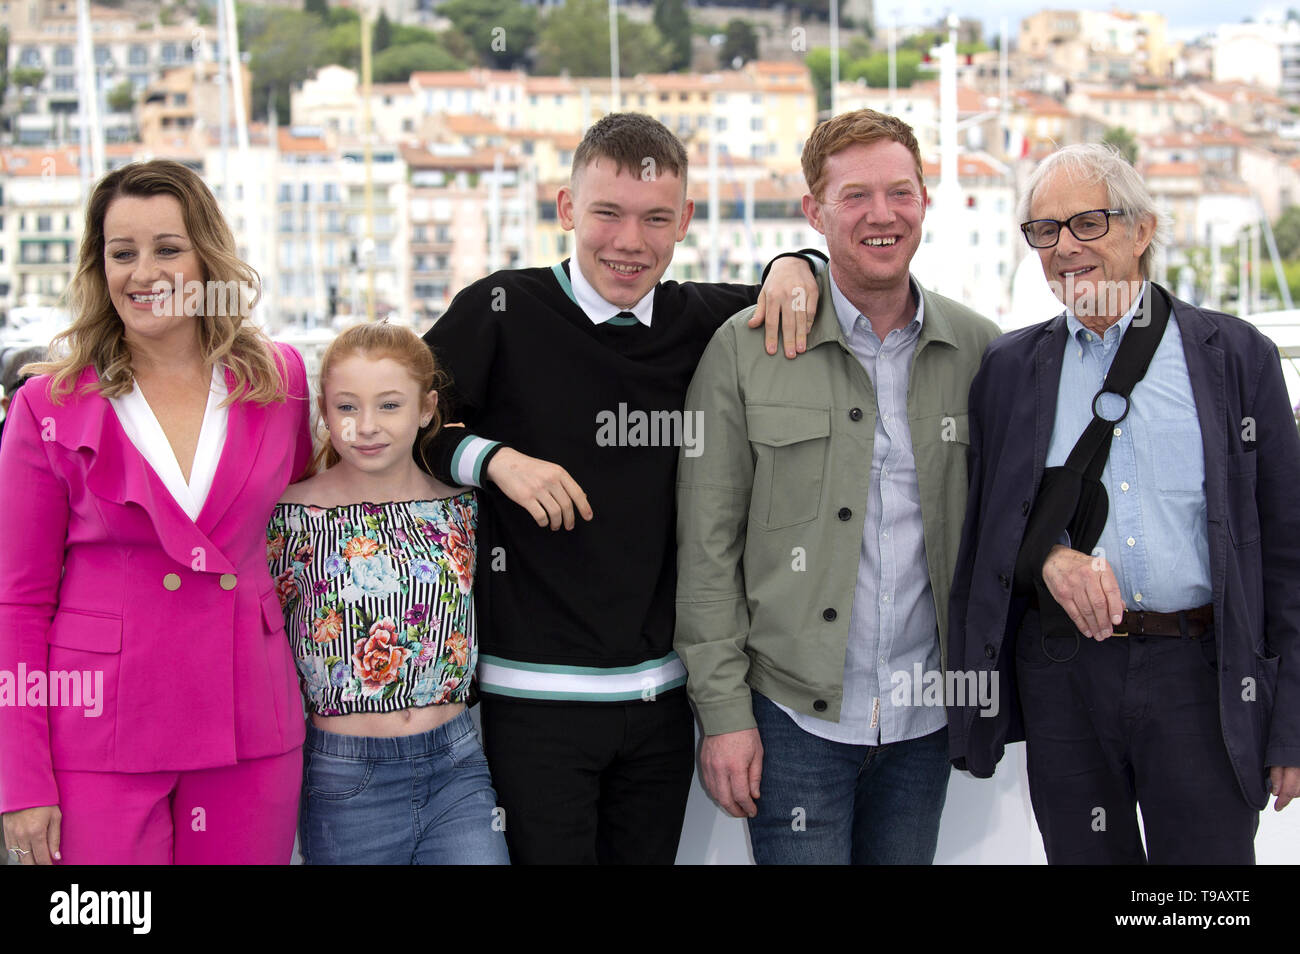 Cannes, France. 17th May, 2019. Debbie Honeywood, Katie Proctor, Rhys Stone, Kris Hitchen and Ken Loach at the 'Sorry We Missed You' photocall during the 72nd Cannes Film Festival at the Palais des Festivals on May 17, 2019 in Cannes, France | usage worldwide Credit: dpa/Alamy Live News Stock Photo